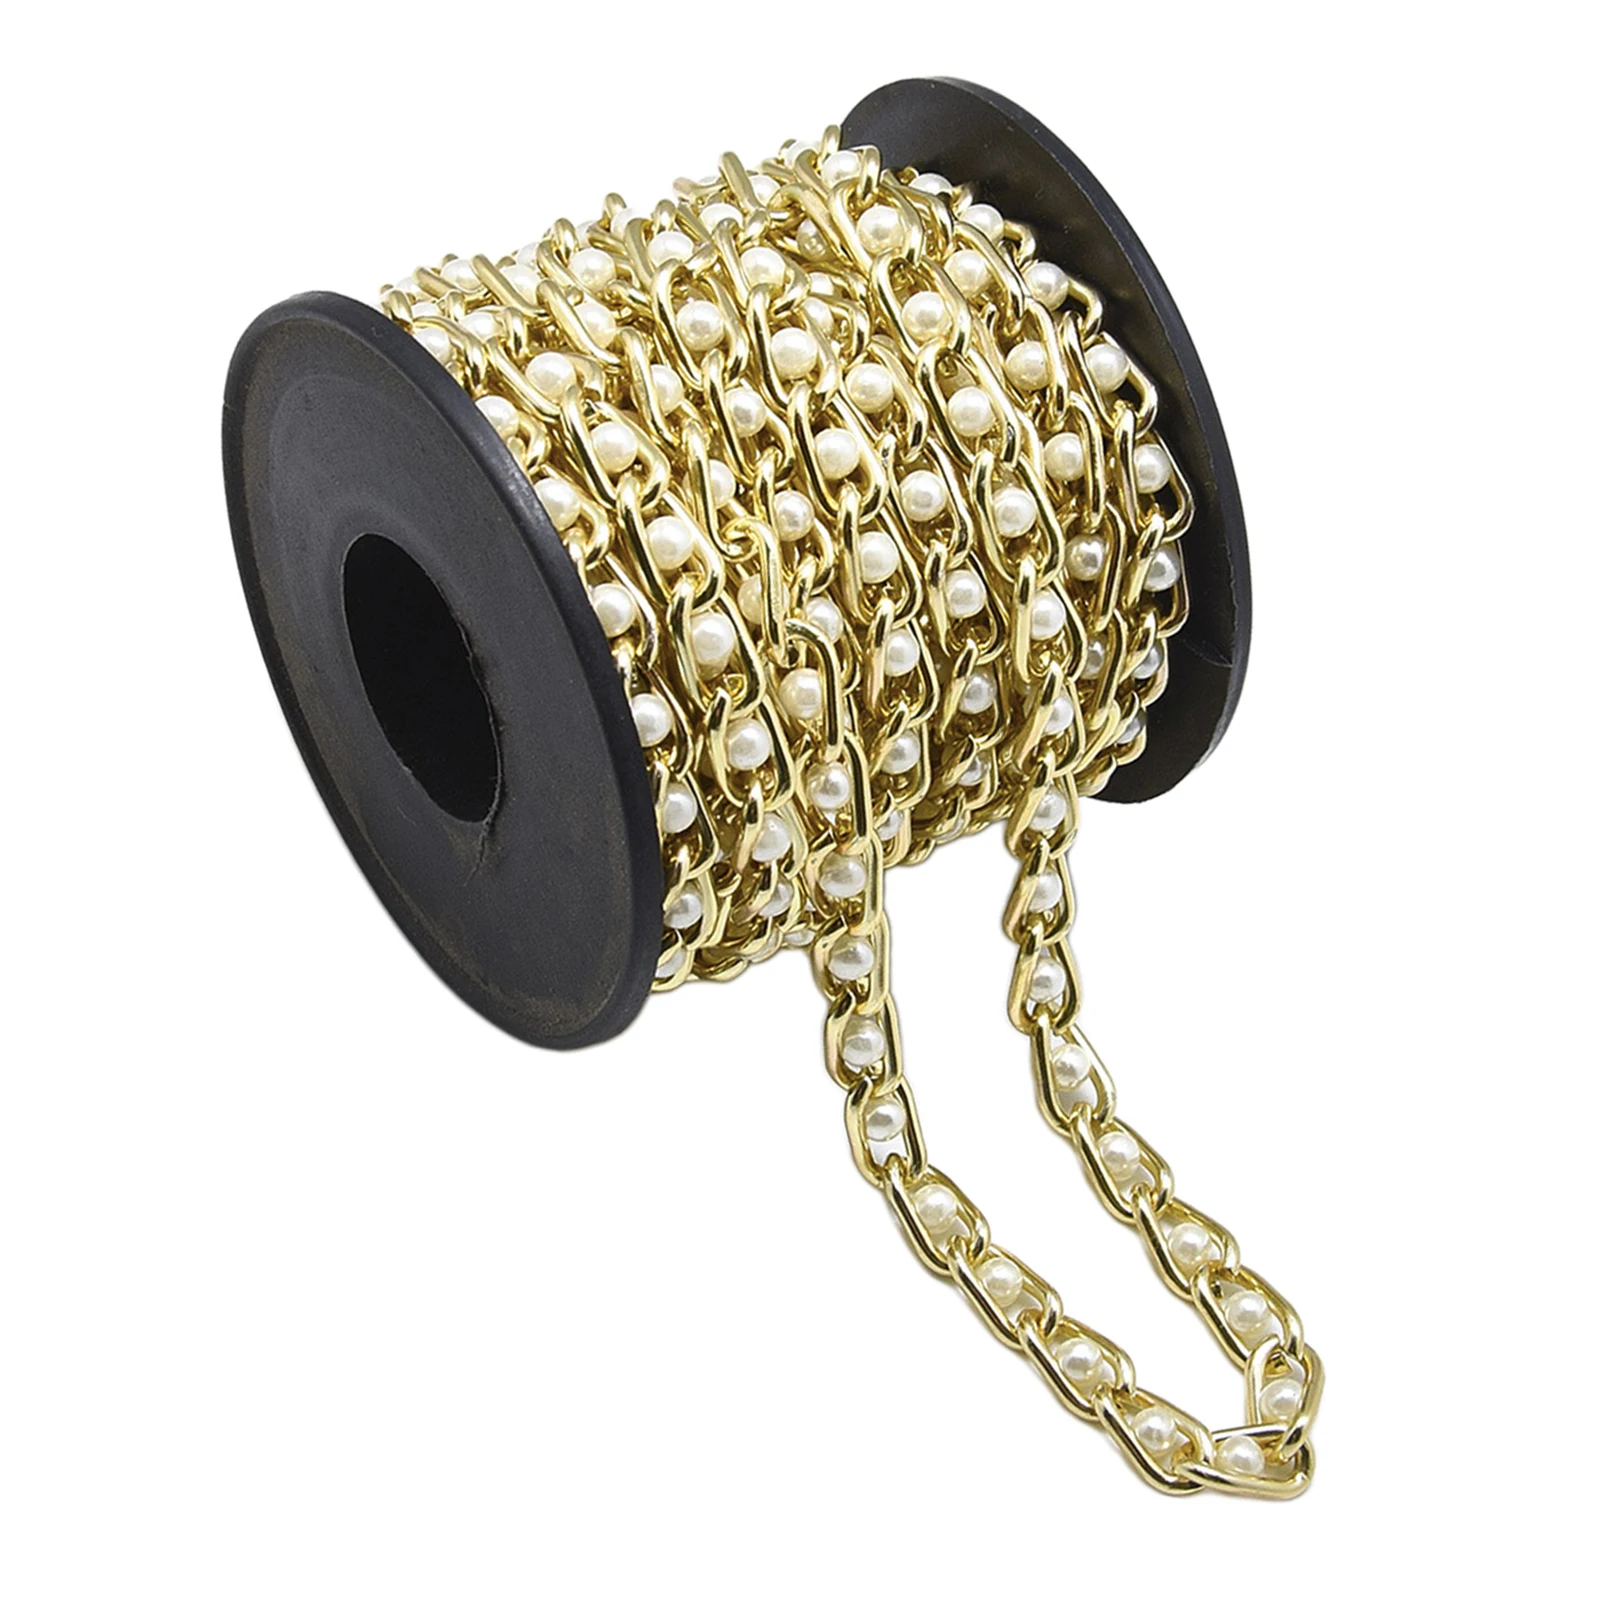 5M Gold Plated Loose Pearl Cable Chain with Spool Jewelry Making DIY Necklace Bracelets Making Clothes Decorative Supplies